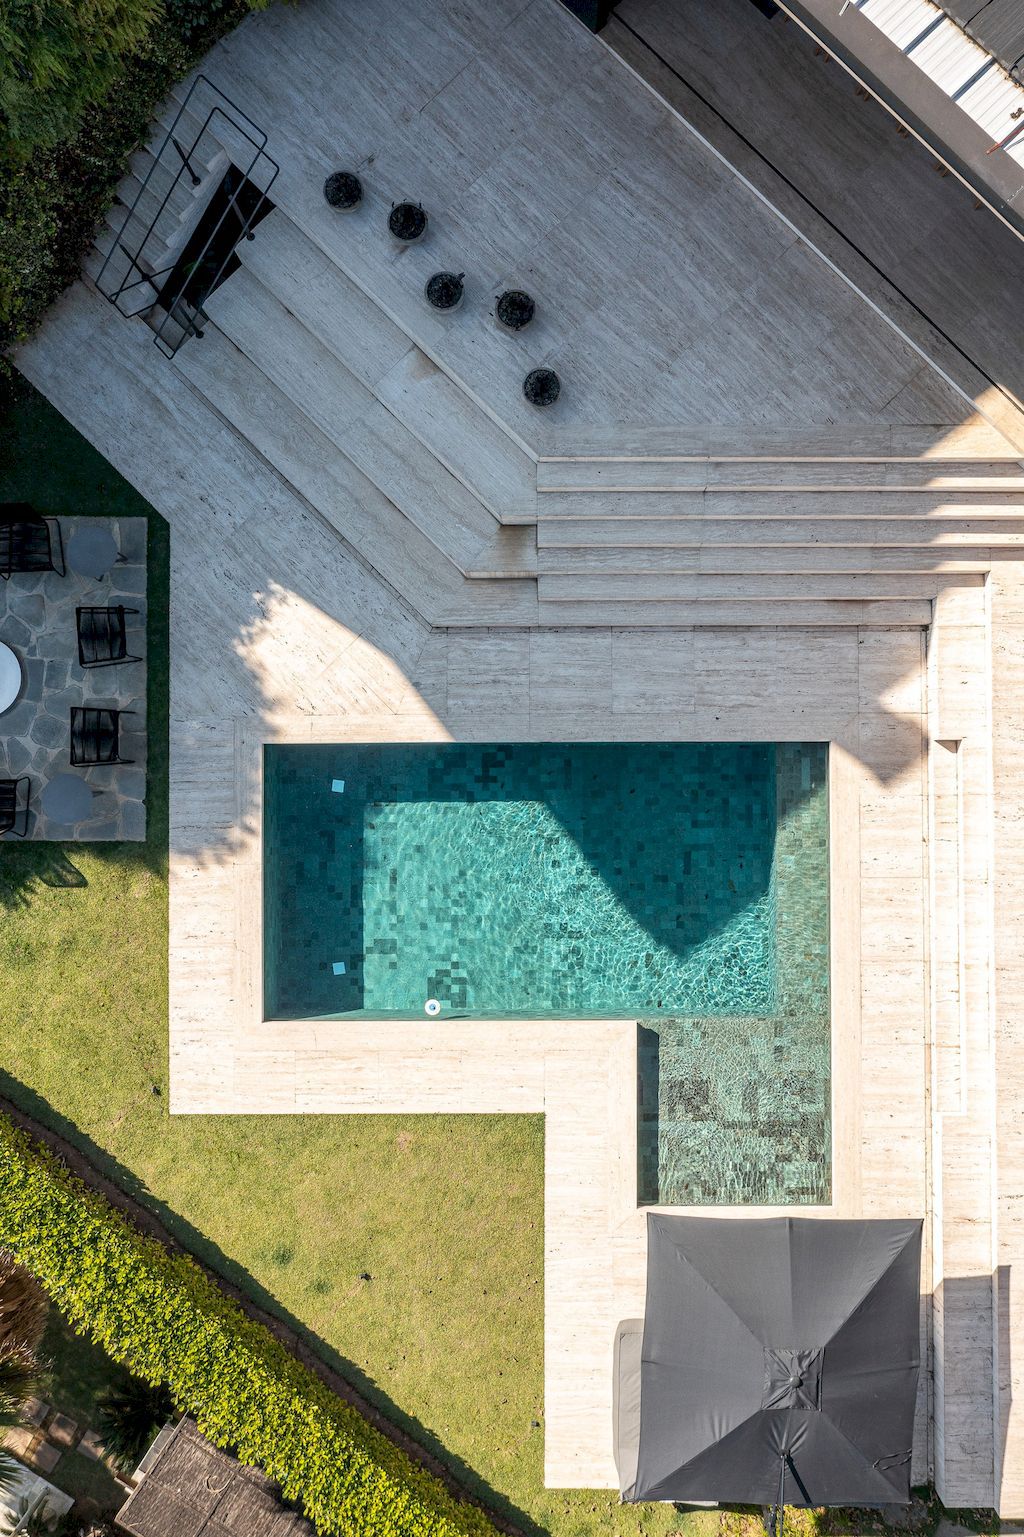 LE House, Stunning Renovation Project in Brazil by Arquitetos Associados